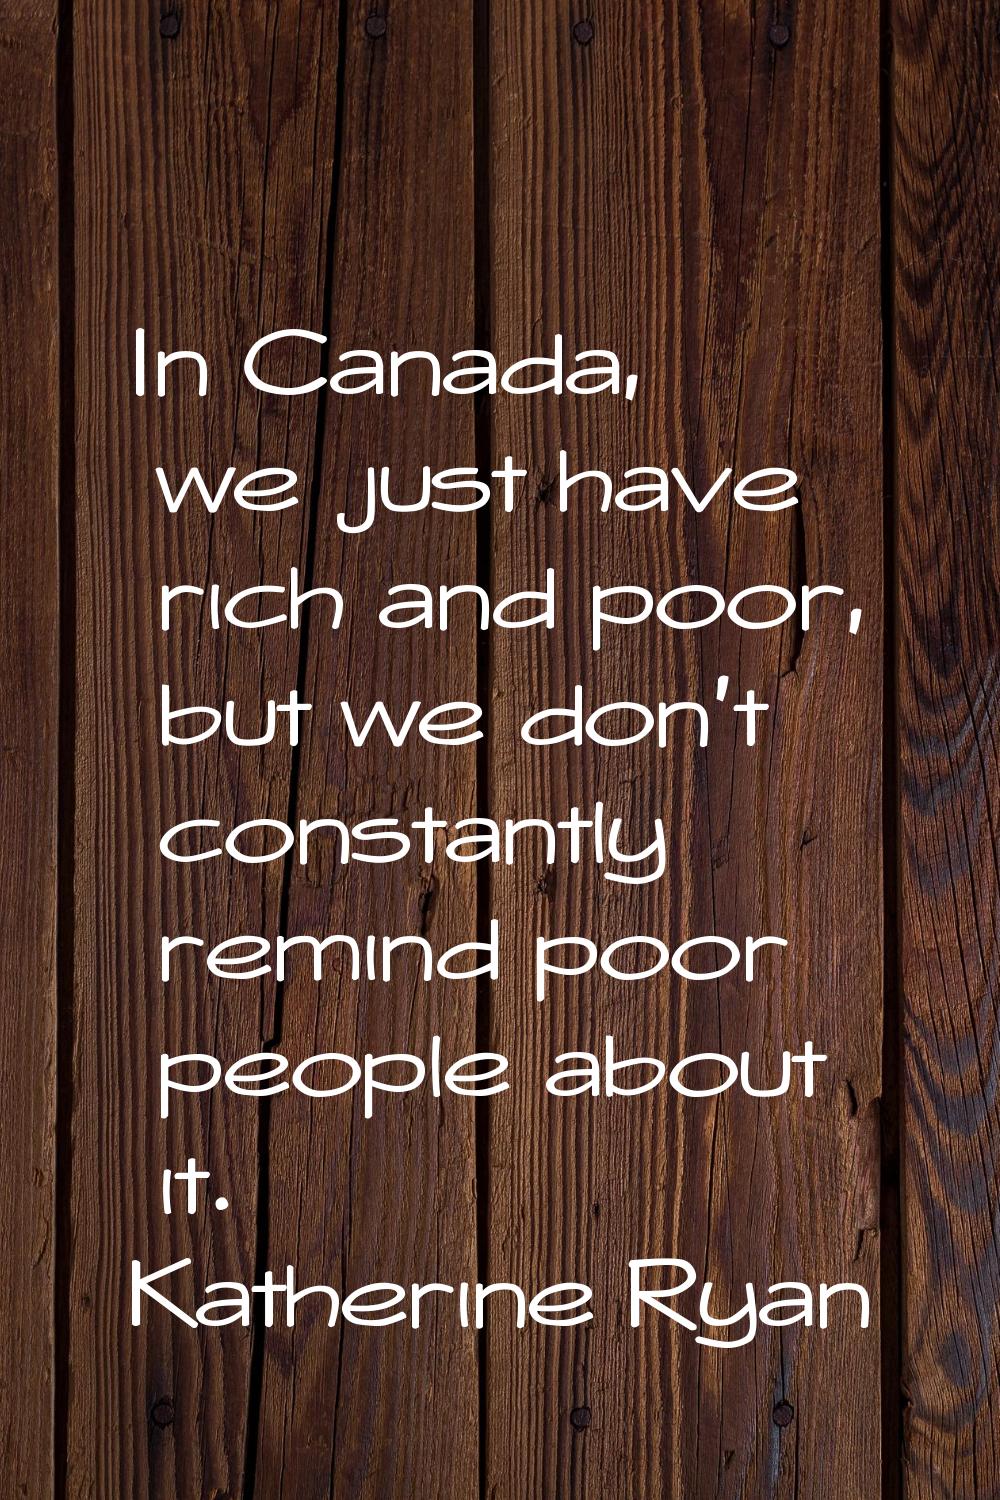 In Canada, we just have rich and poor, but we don't constantly remind poor people about it.